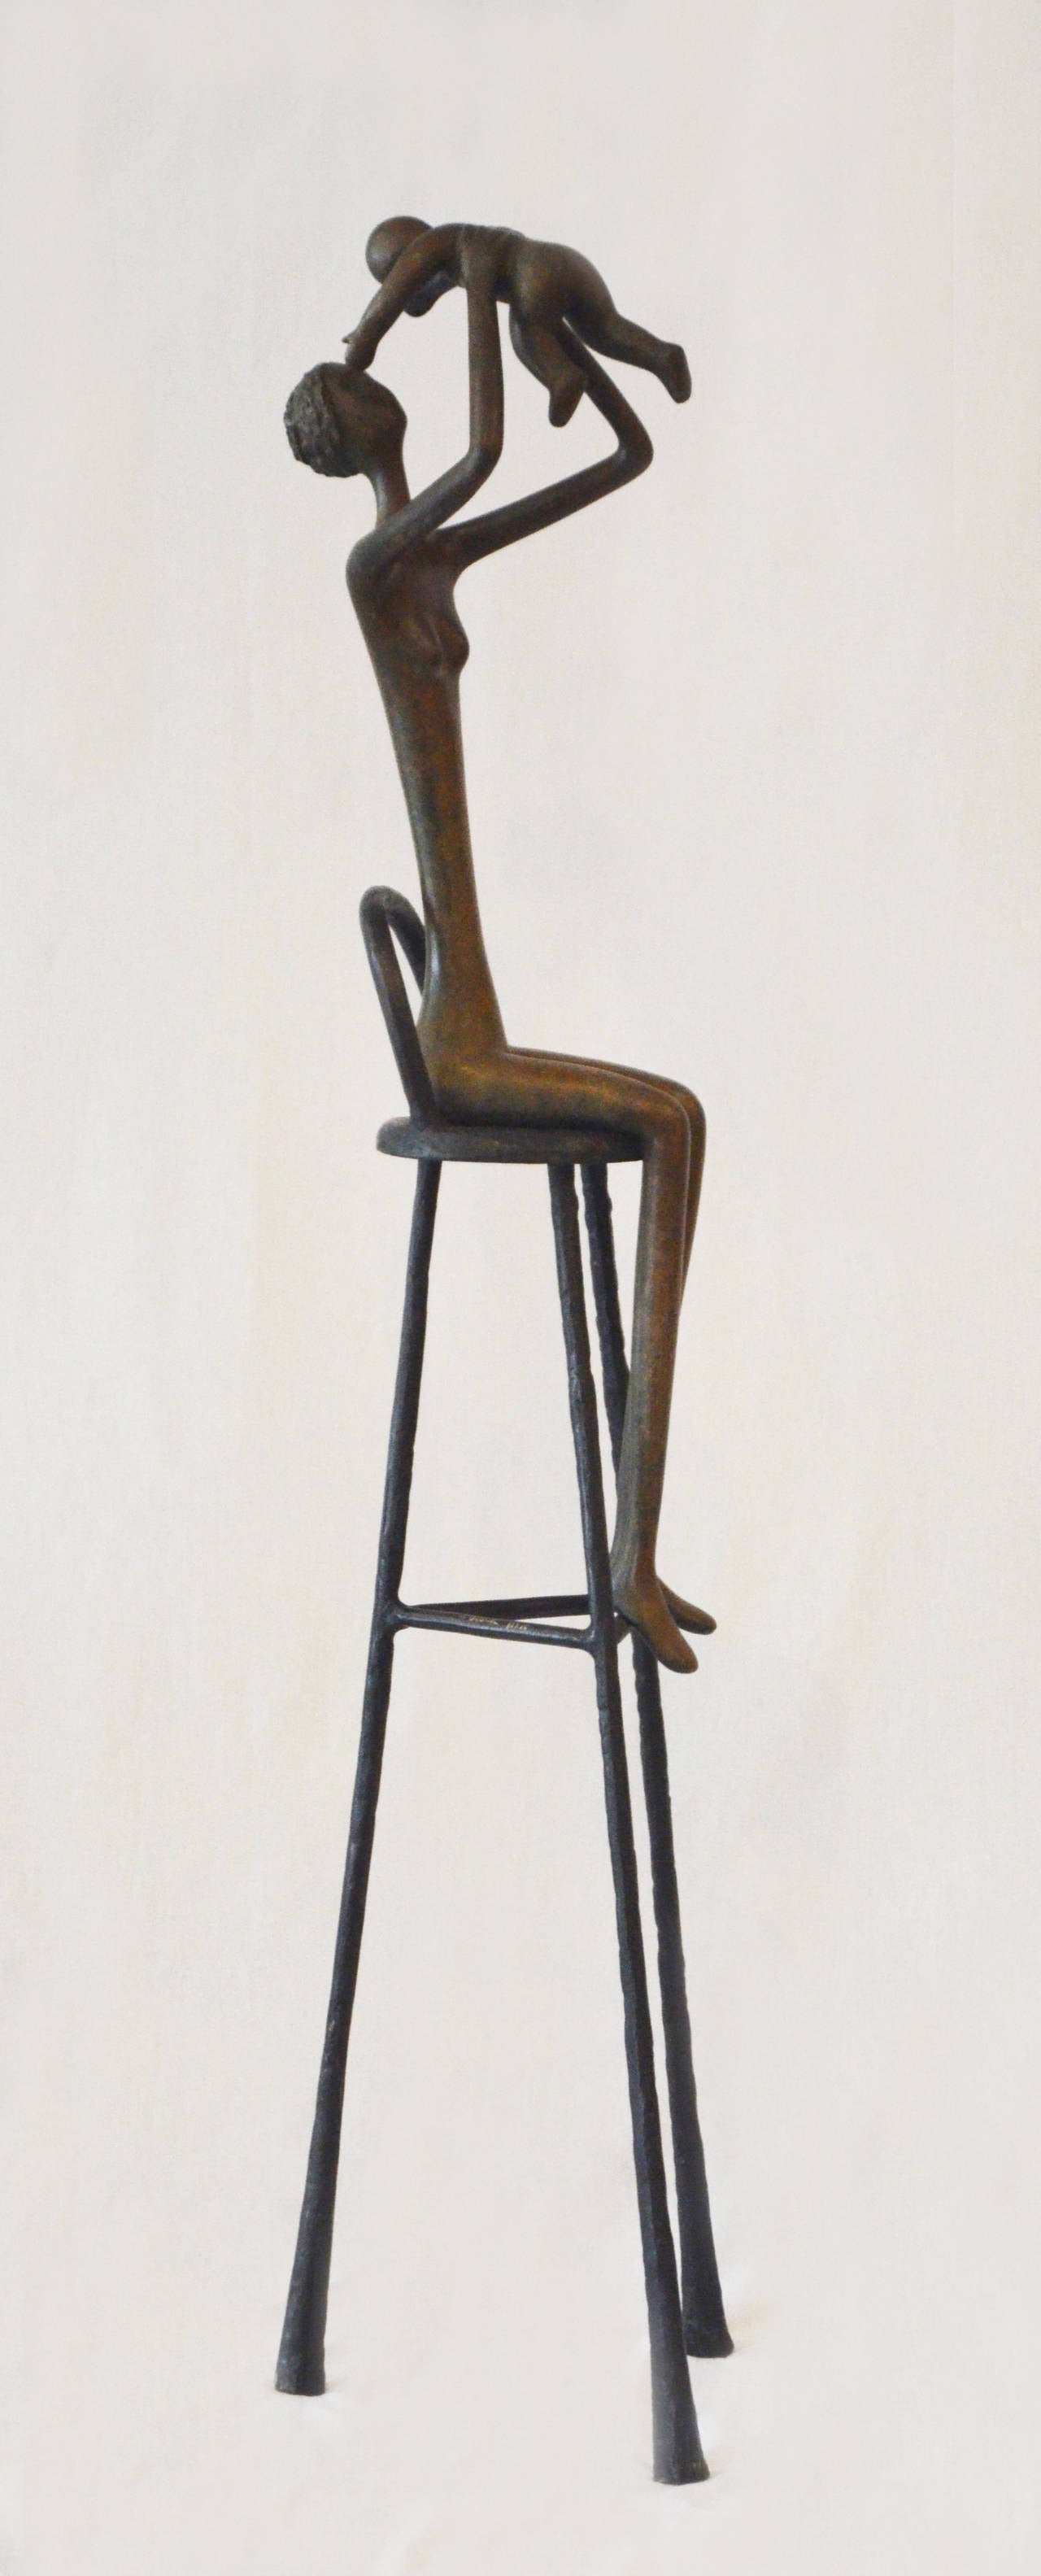 Ruth Bloch Figurative Sculpture - Mother and Son on Stool